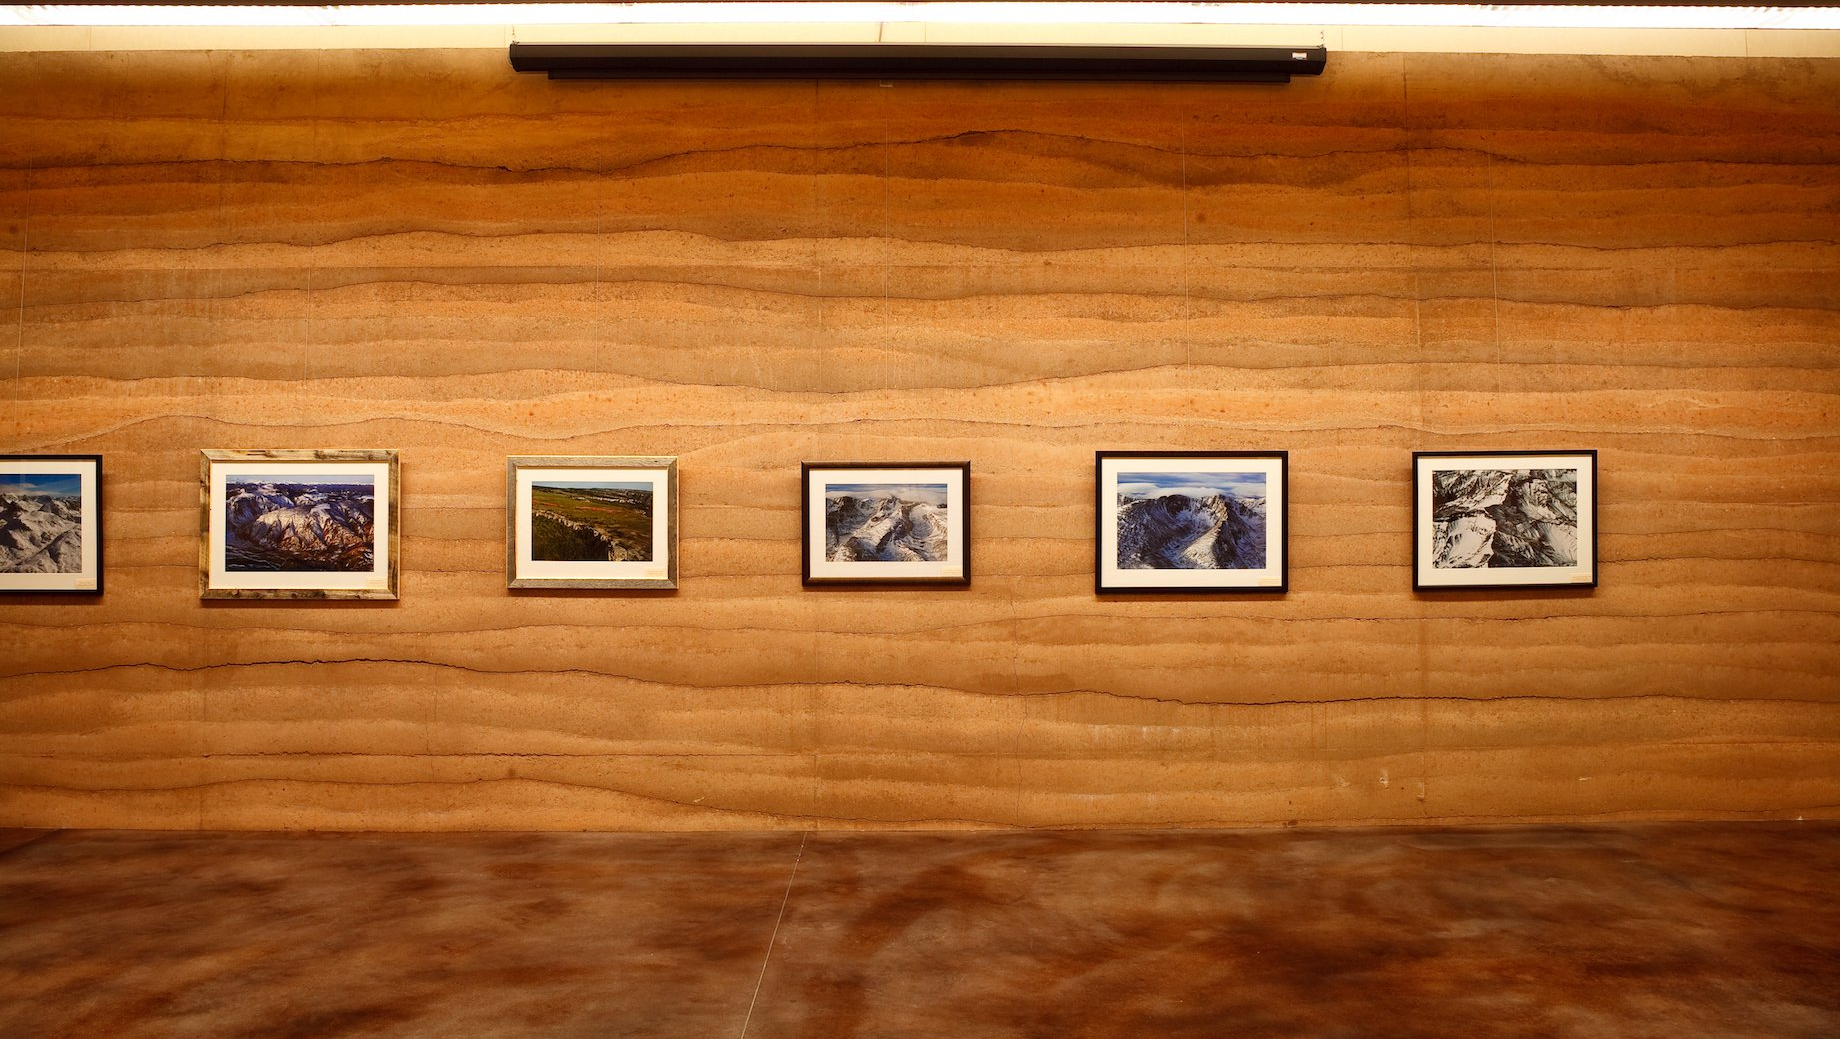 sublette county library rammed earth SIREWALL with photographs hanging like a gallery